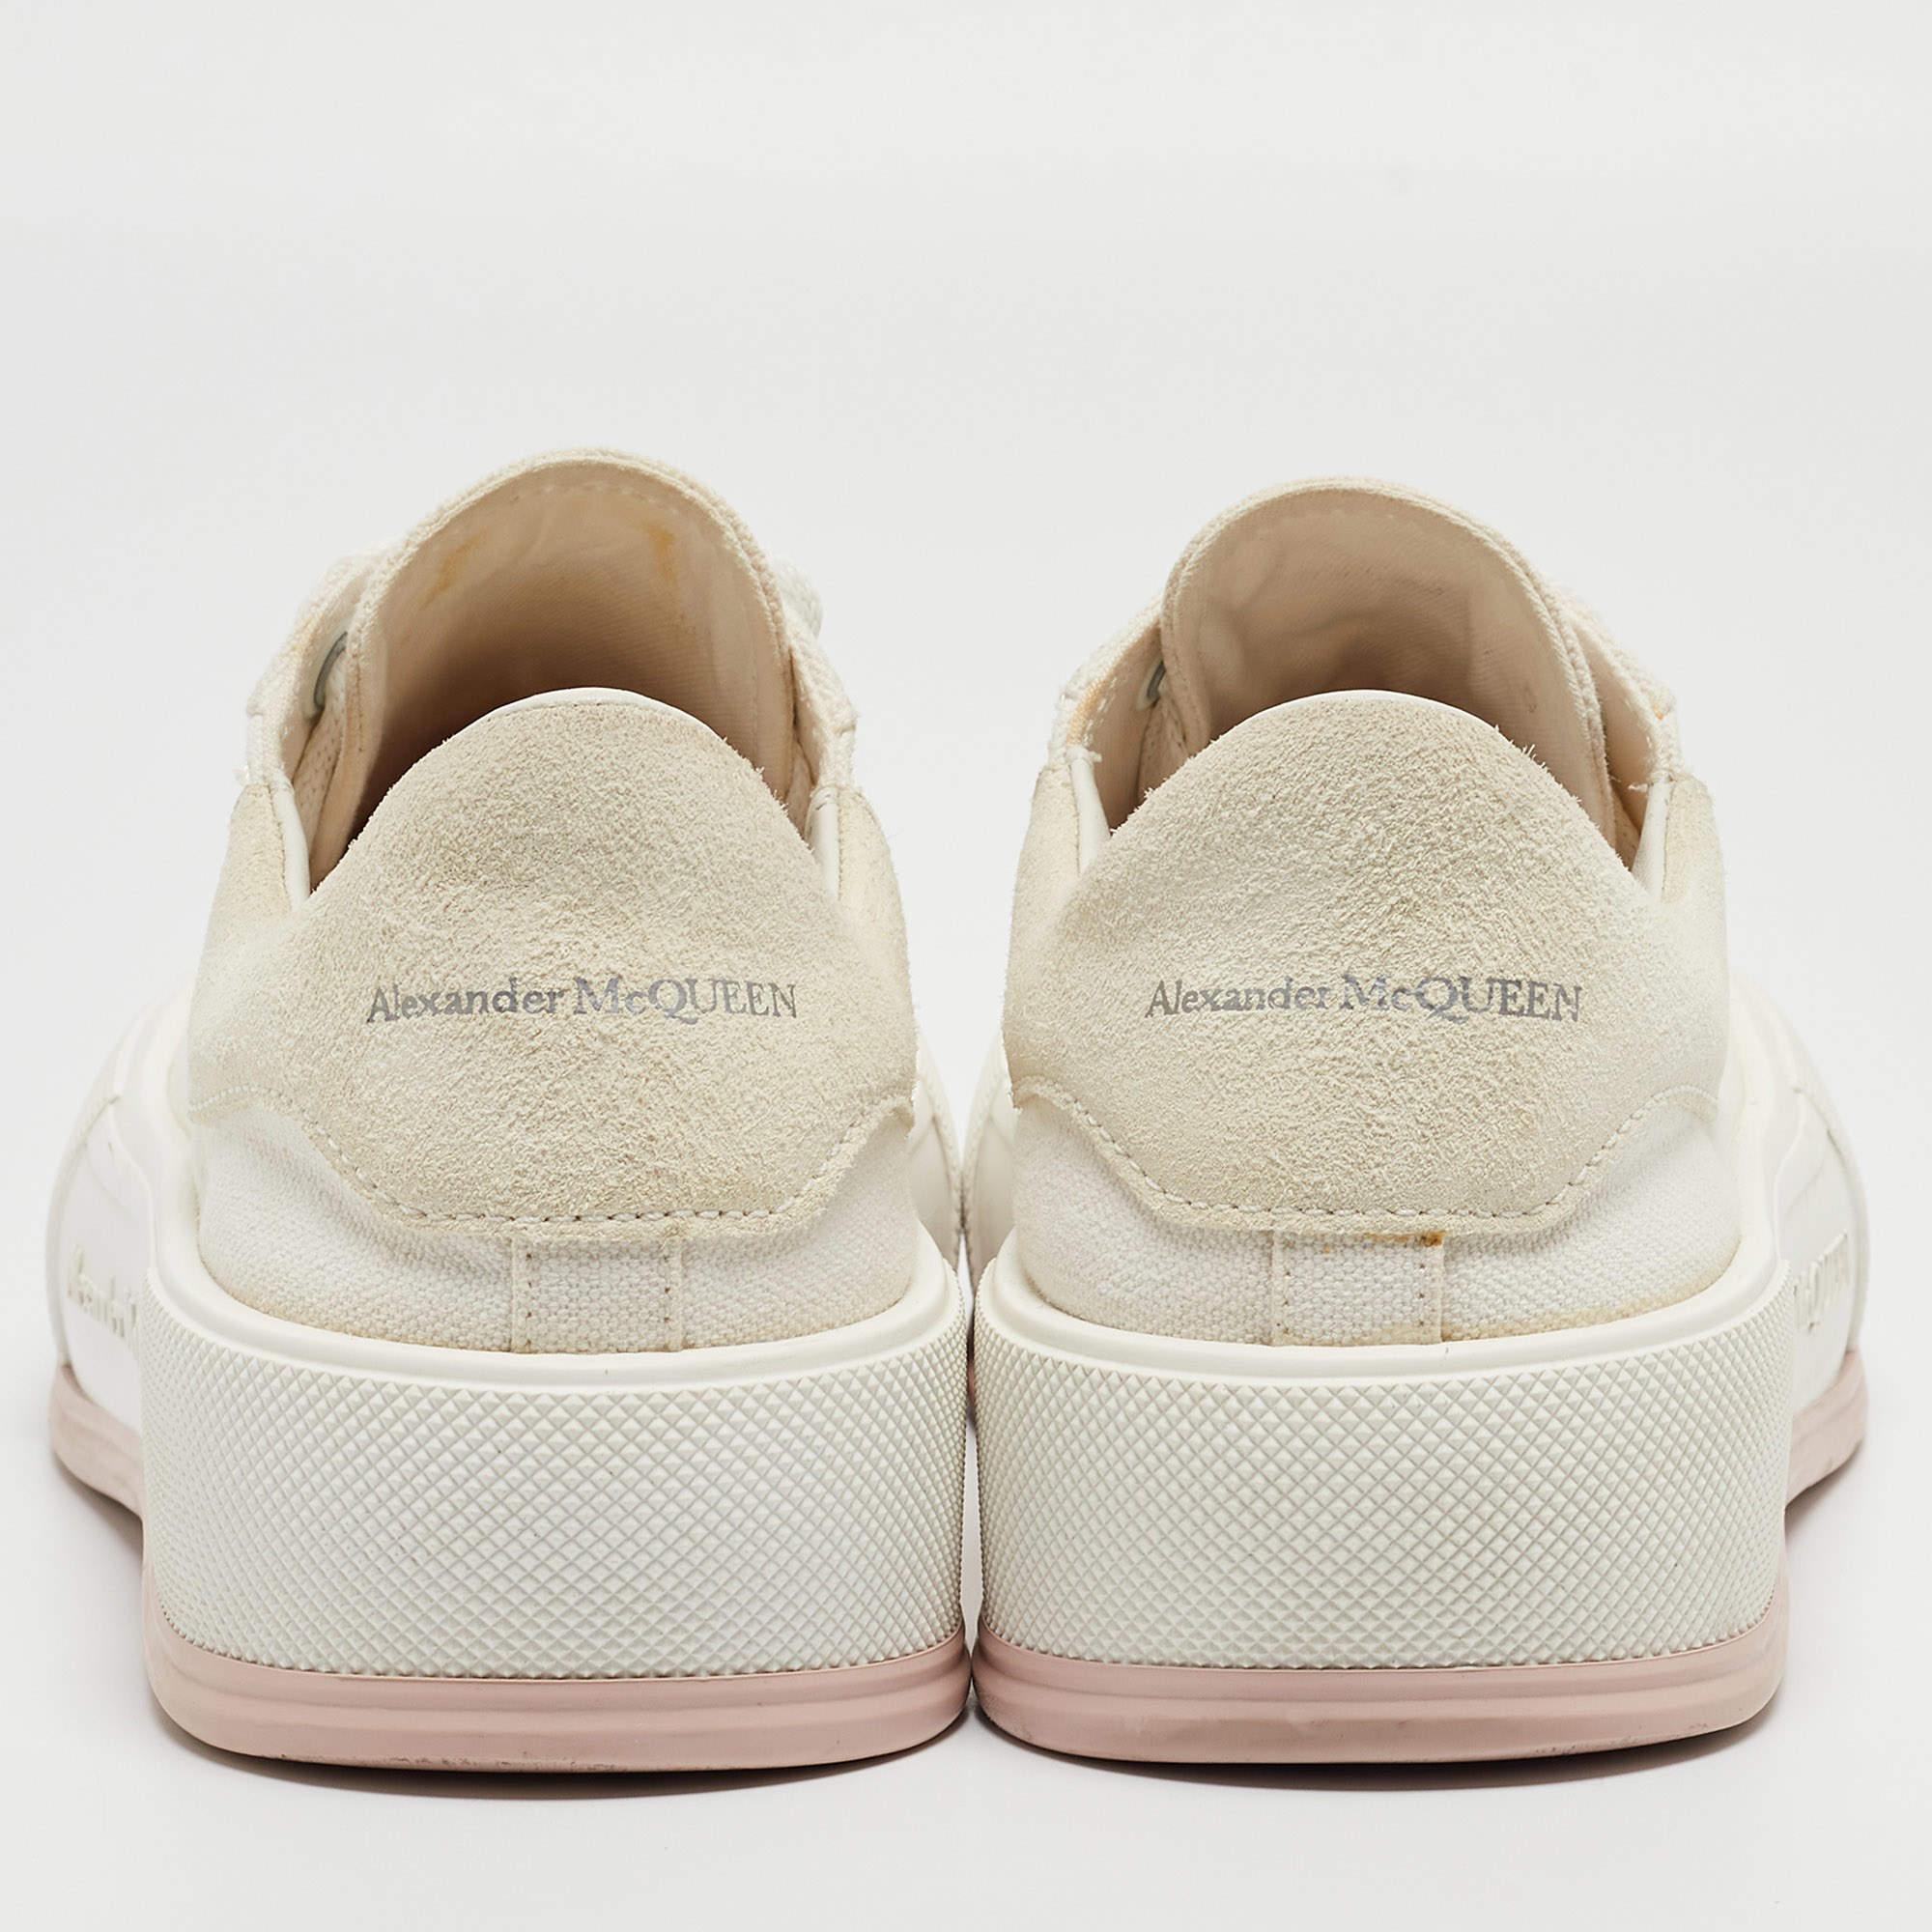 Alexander McQueen White/Grey Suede and Canvas Low Top Sneakers Size 37 For Sale 4